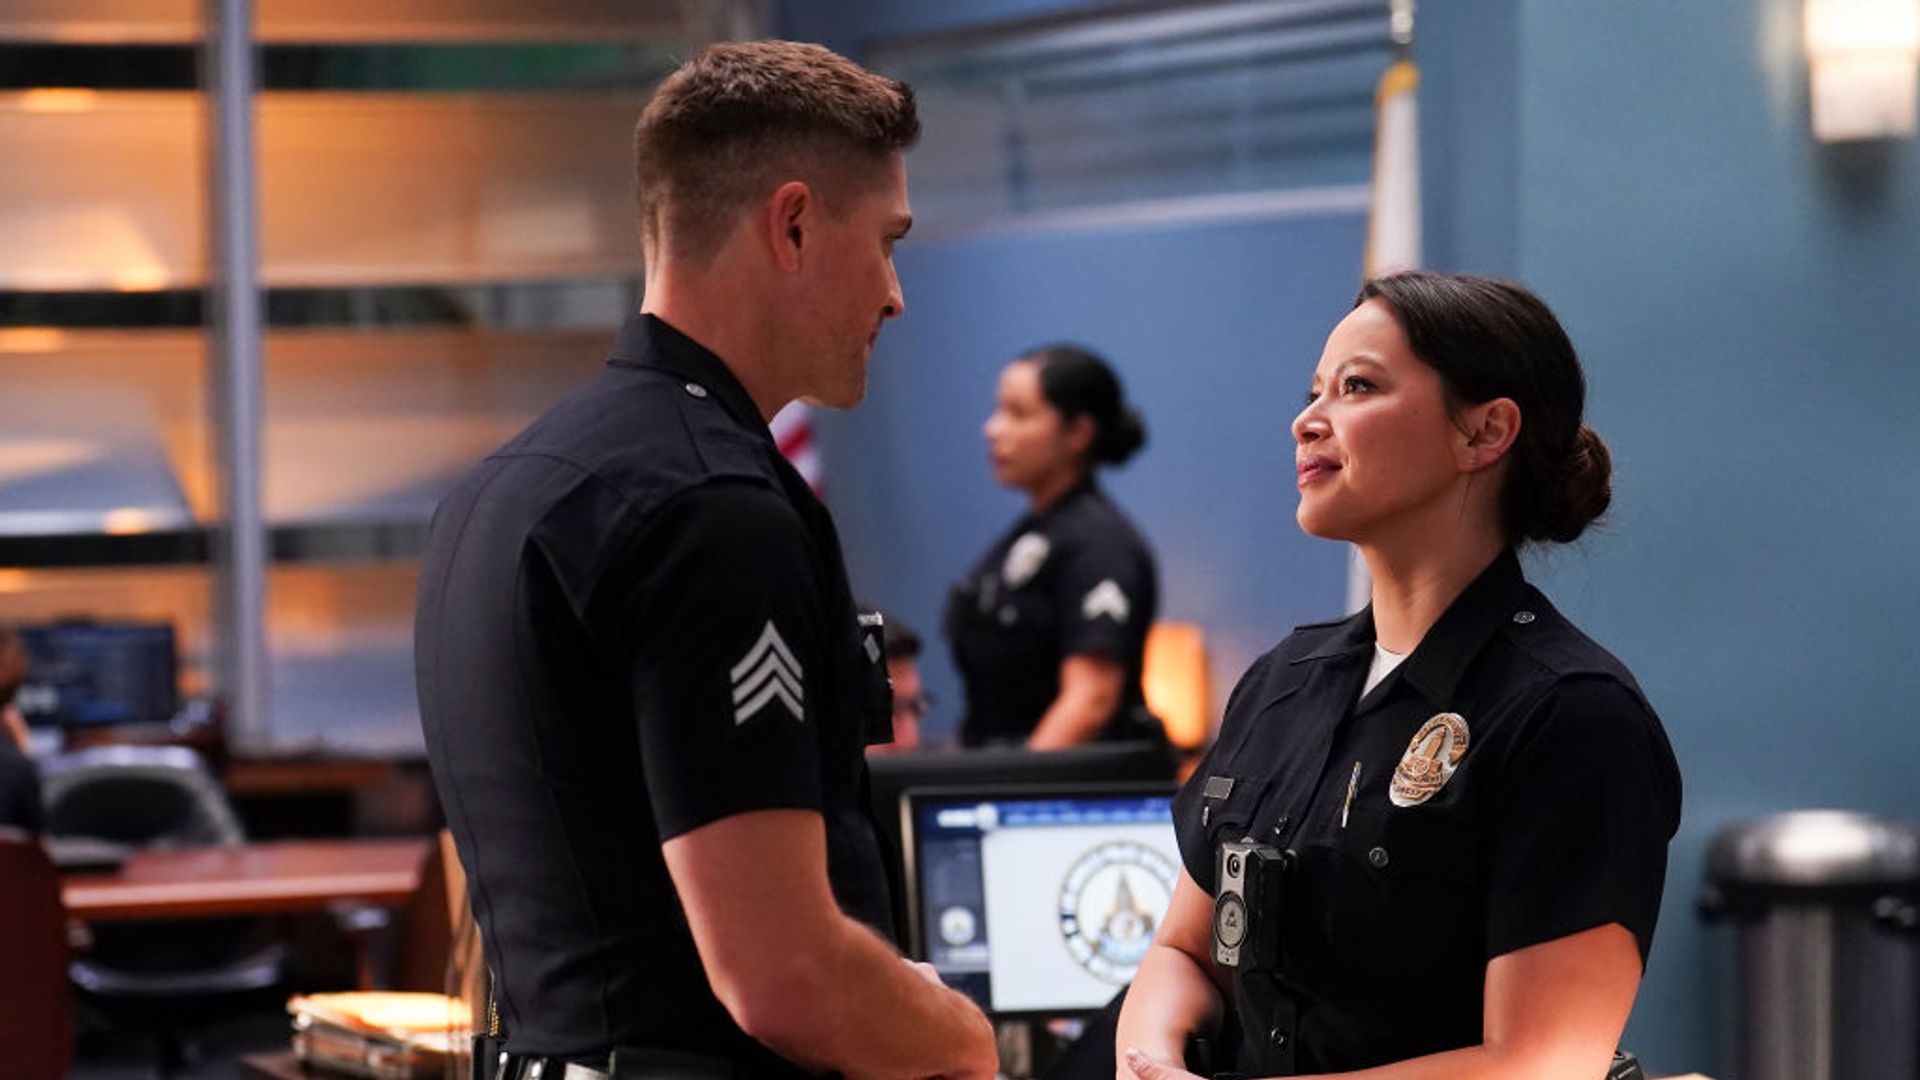 Tim Bradford and Lucy Chen speak in the police station in The Rookie